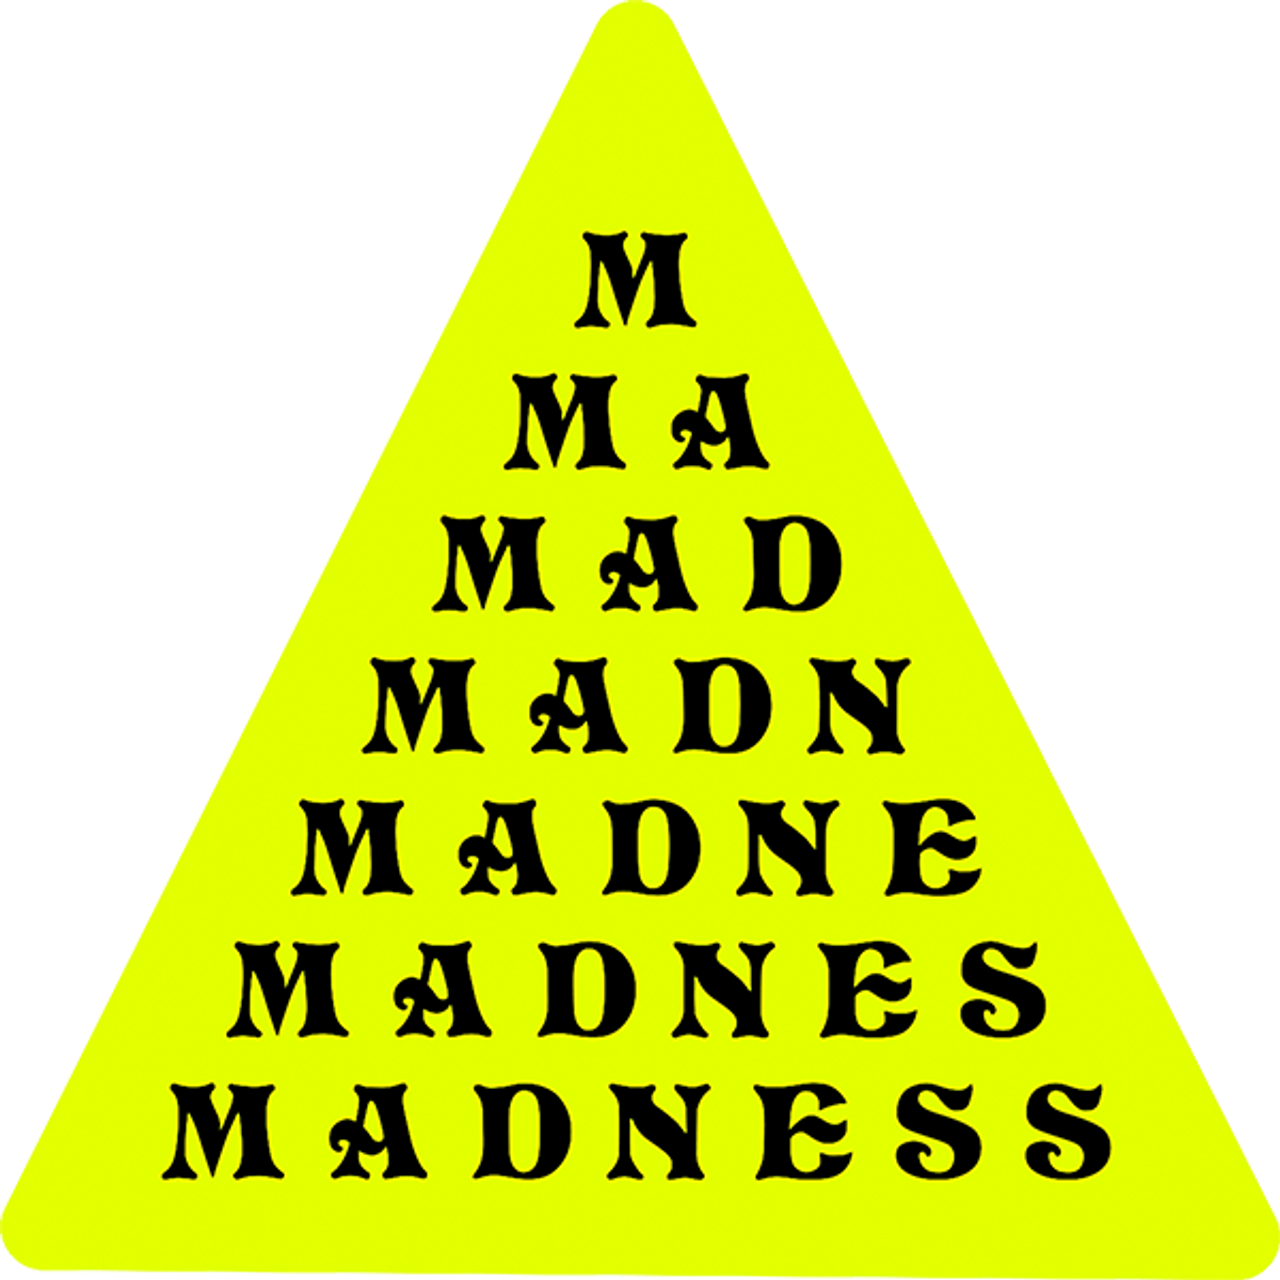 MADNESS PYRAMID DECAL YELLOW STICKER (2pack)